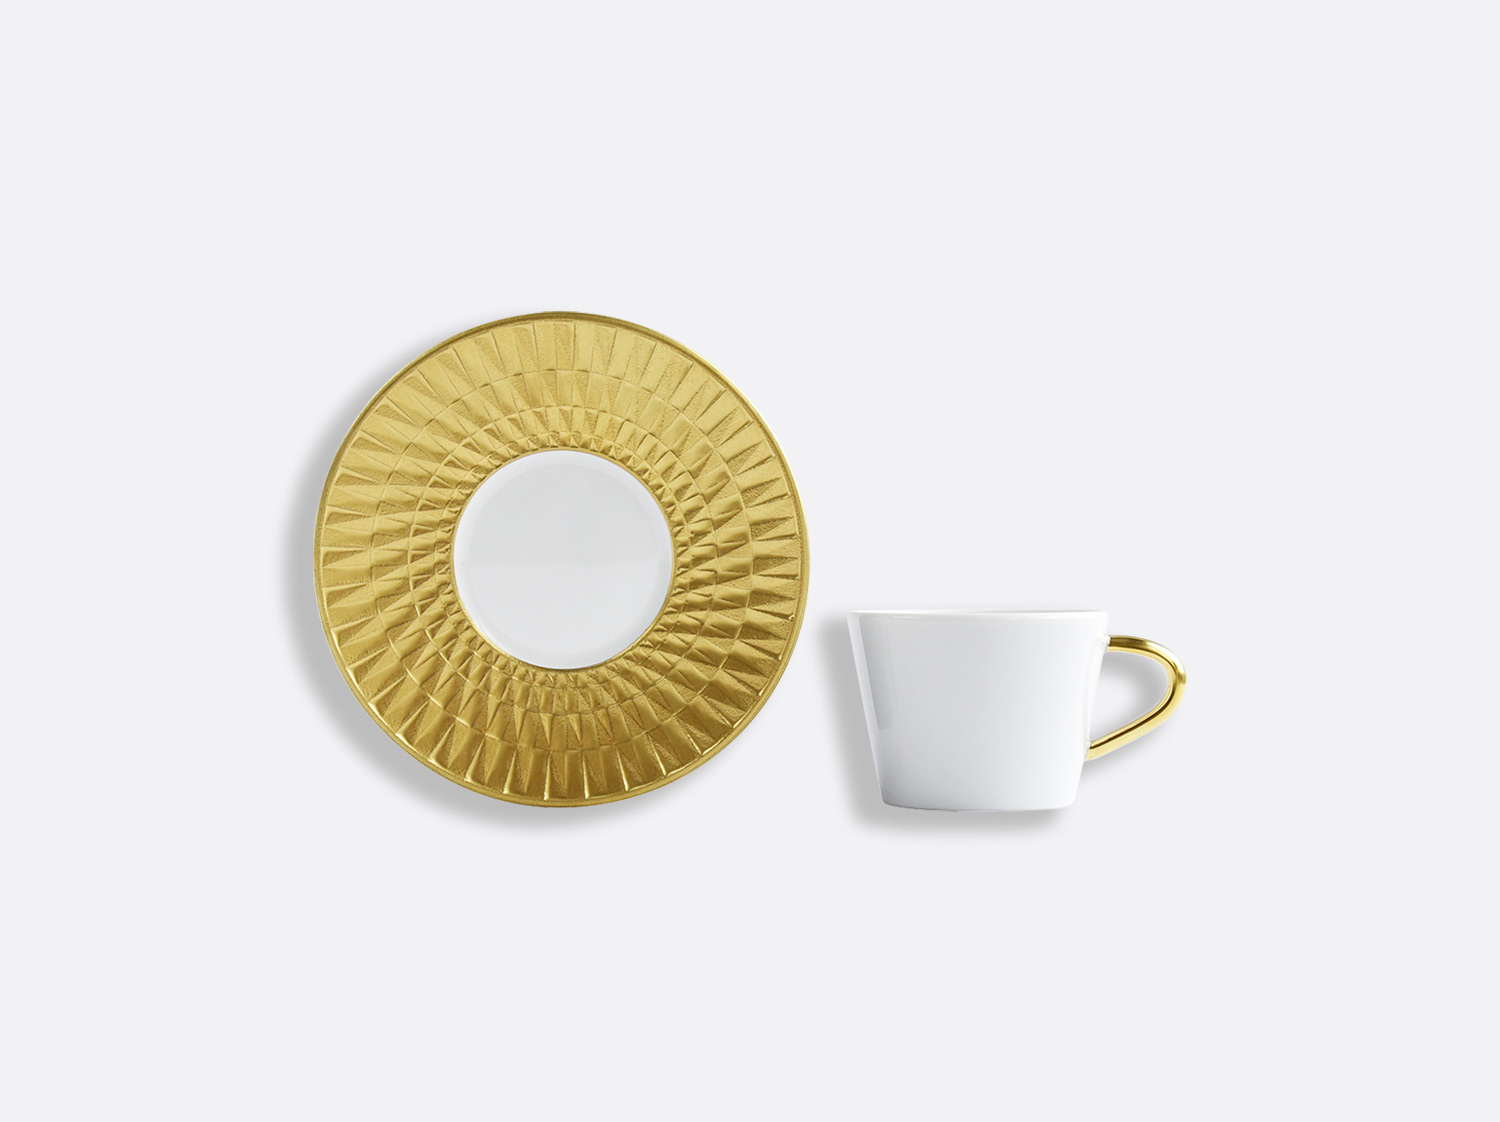 China per unit of the collection Twist or | Bernardaud